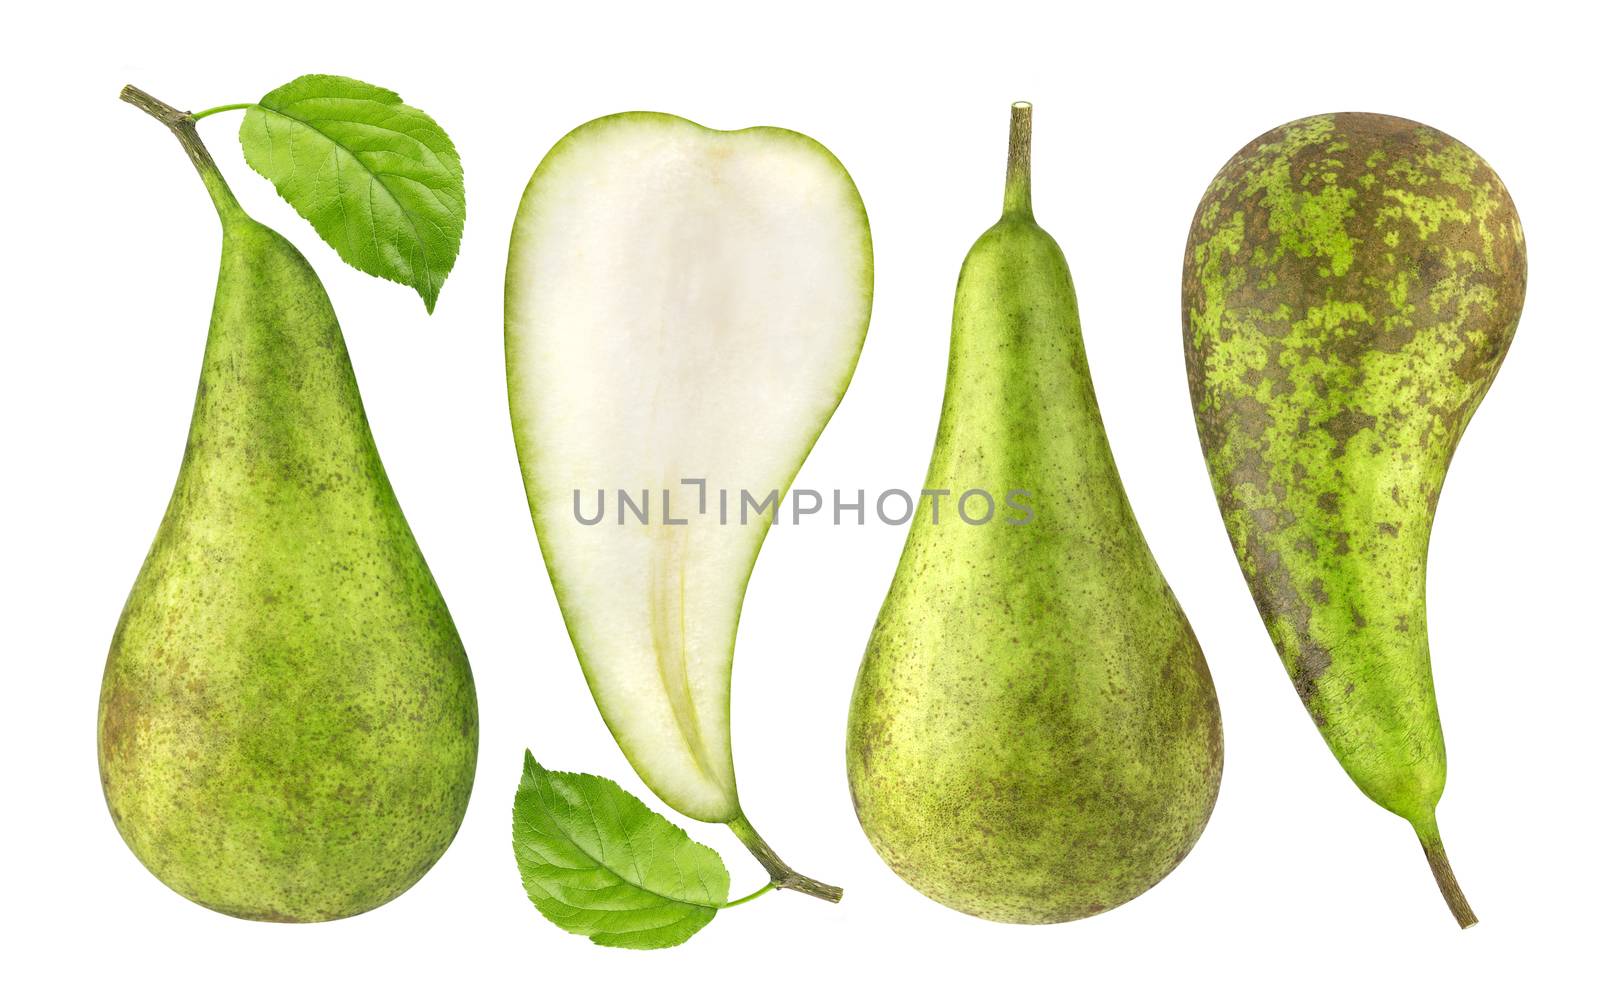 Green conference pears isolated on white by xamtiw